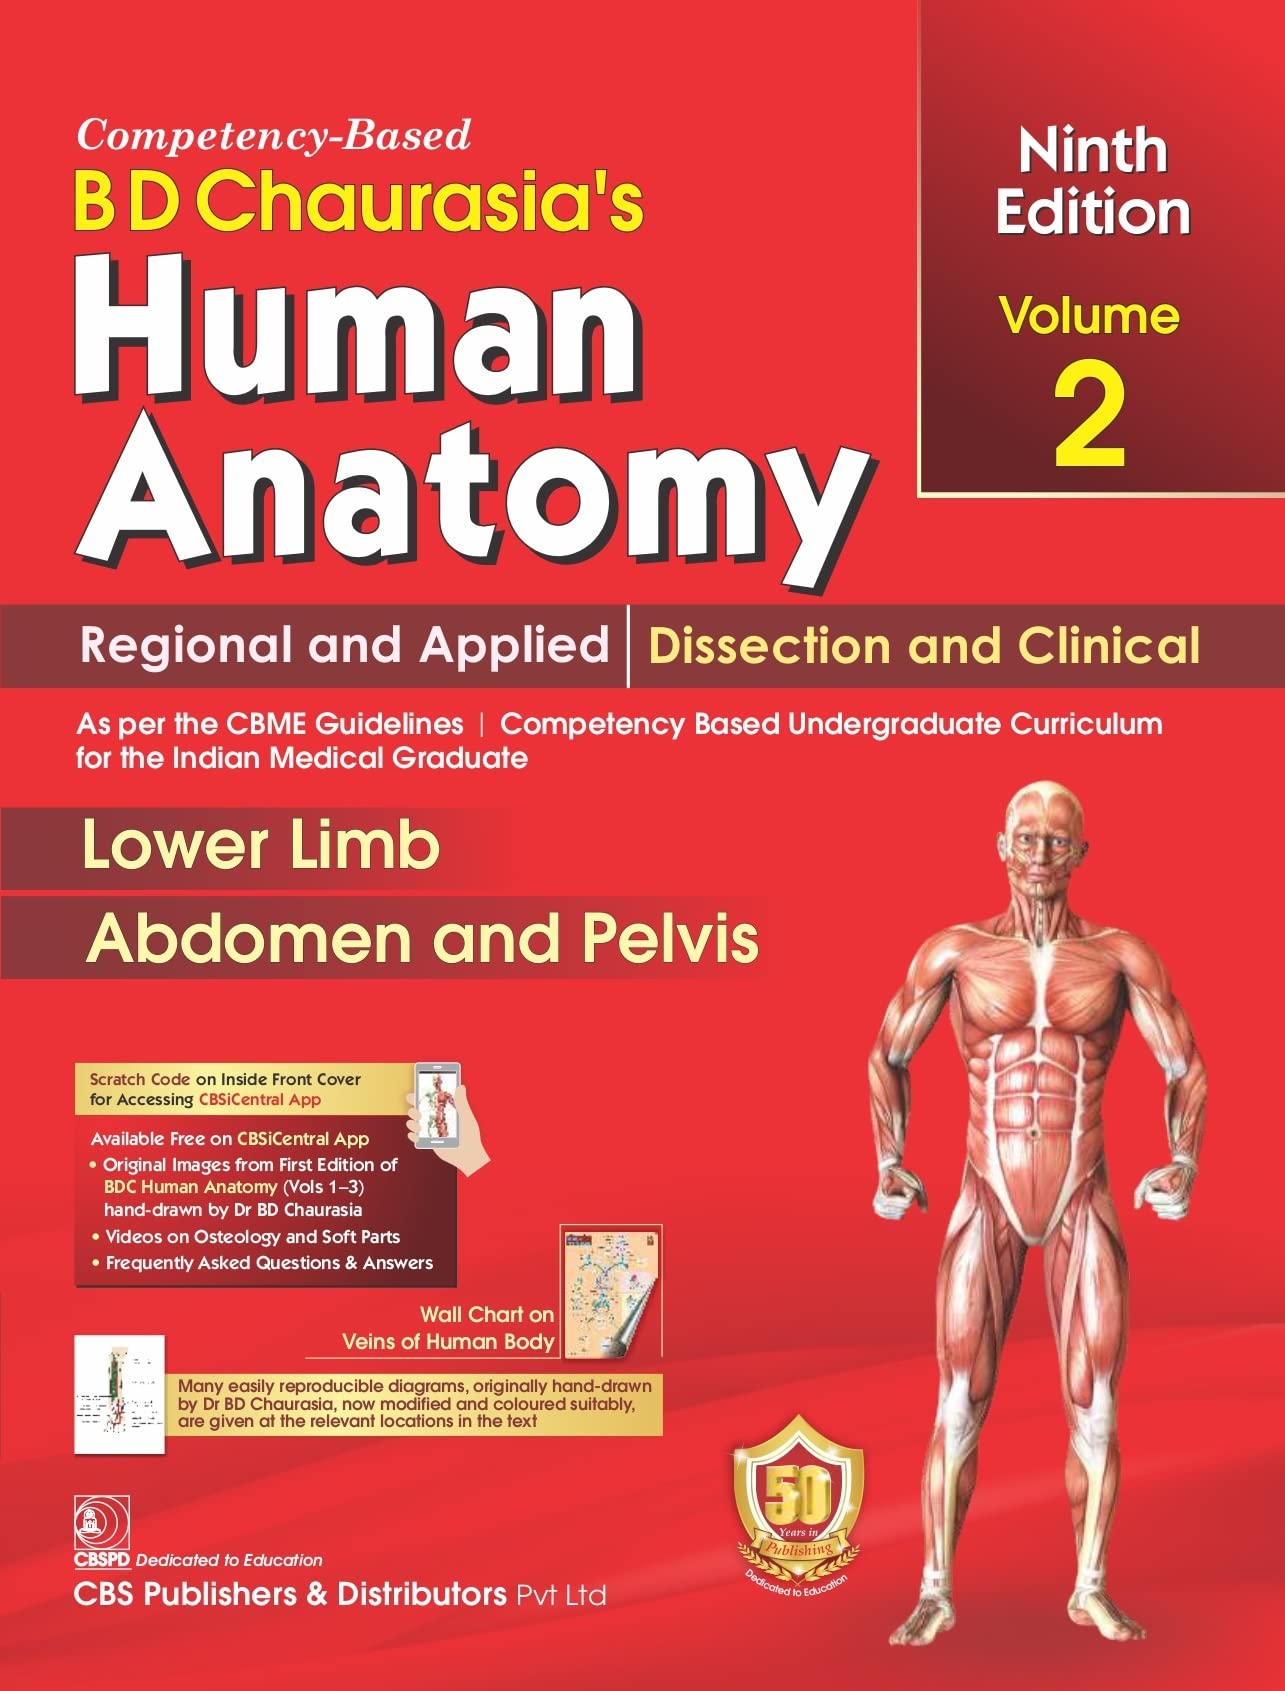 Human Anatomy, 9th Edition 2023, Vol.2 Regional and Applied Dissection and Clinical: Lower Limb Abdomen and Pelvis